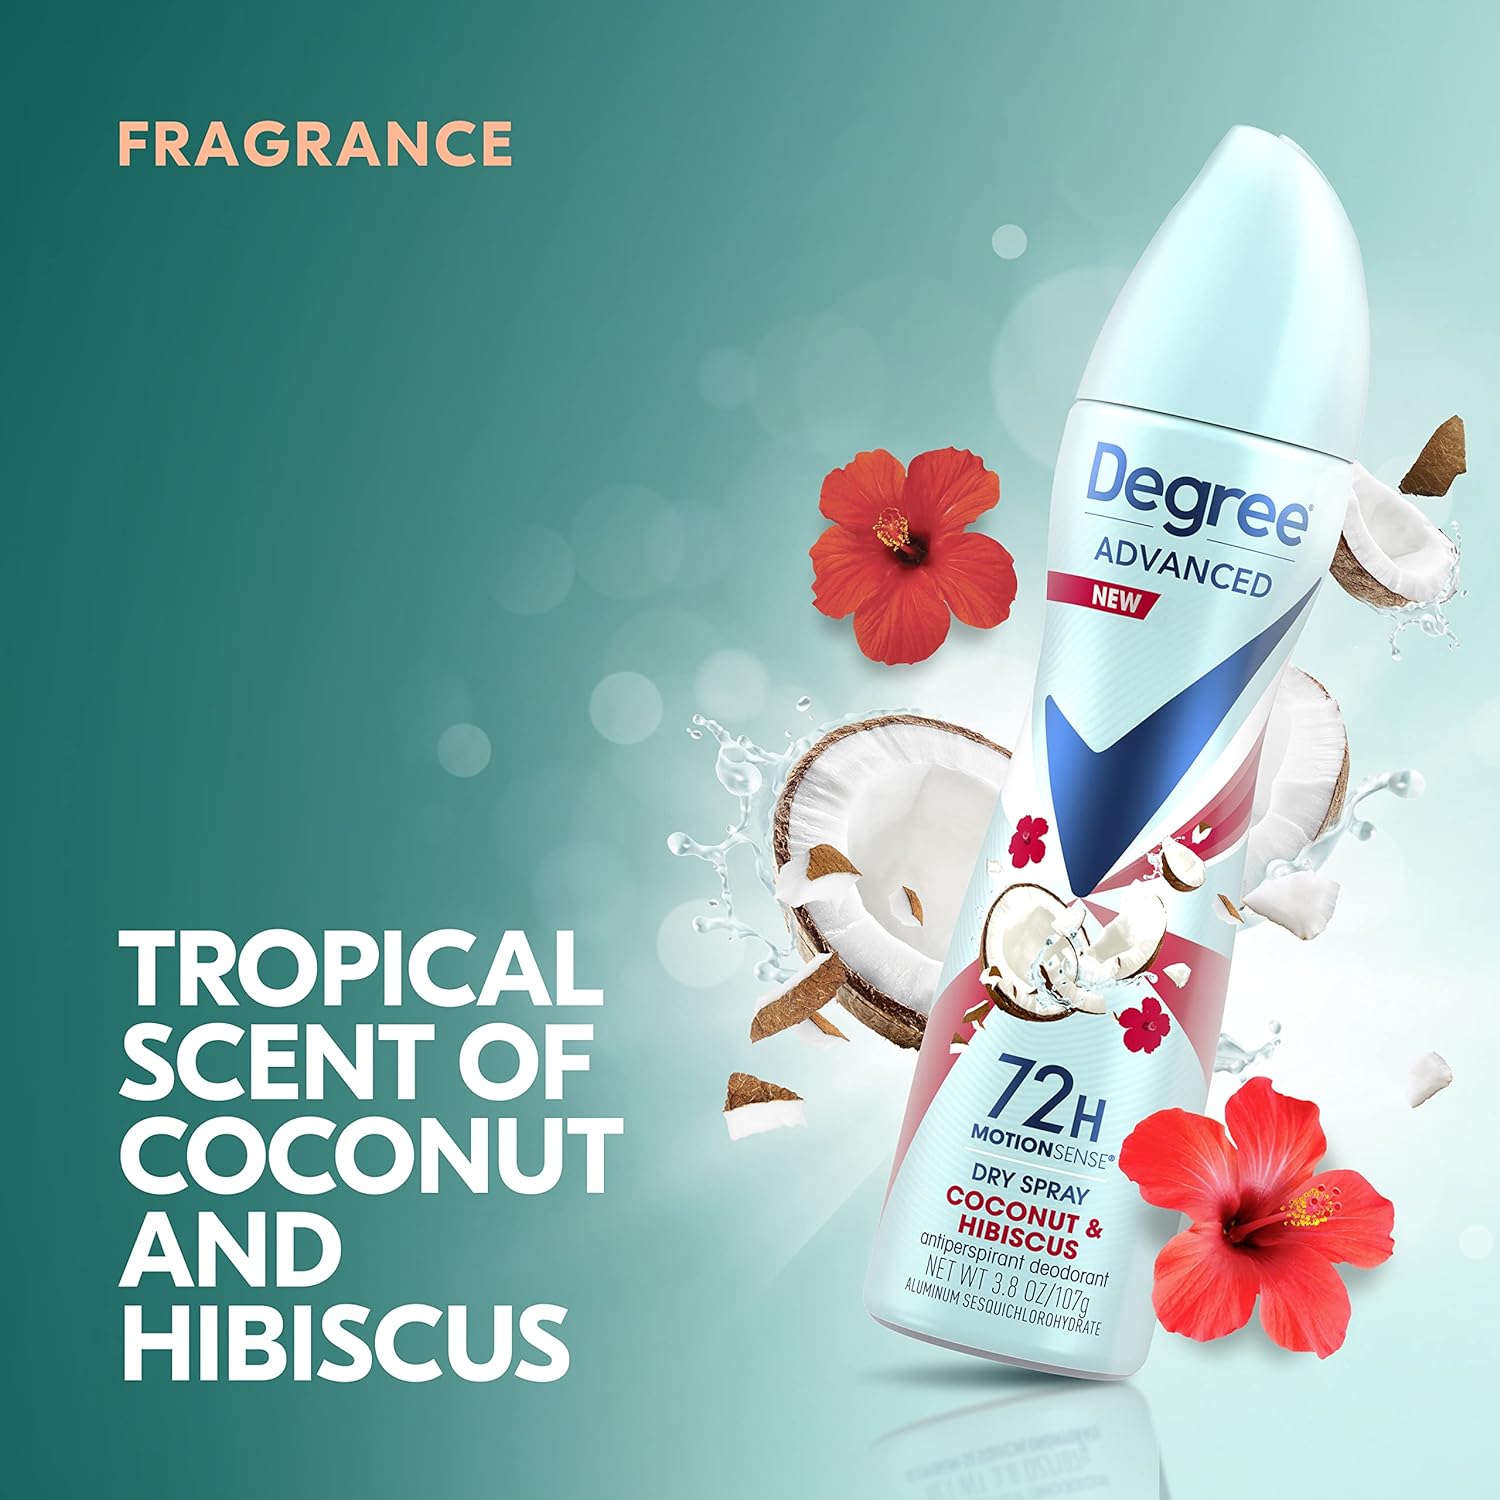 Degree Advanced Antiperspirant Deodorant Dry Spray Coconut & Hibiscus 3 count 72-Hour Sweat and Odor Protection Deodorant Spray With MotionSense Technology 3.8 oz : Beauty & Personal Care